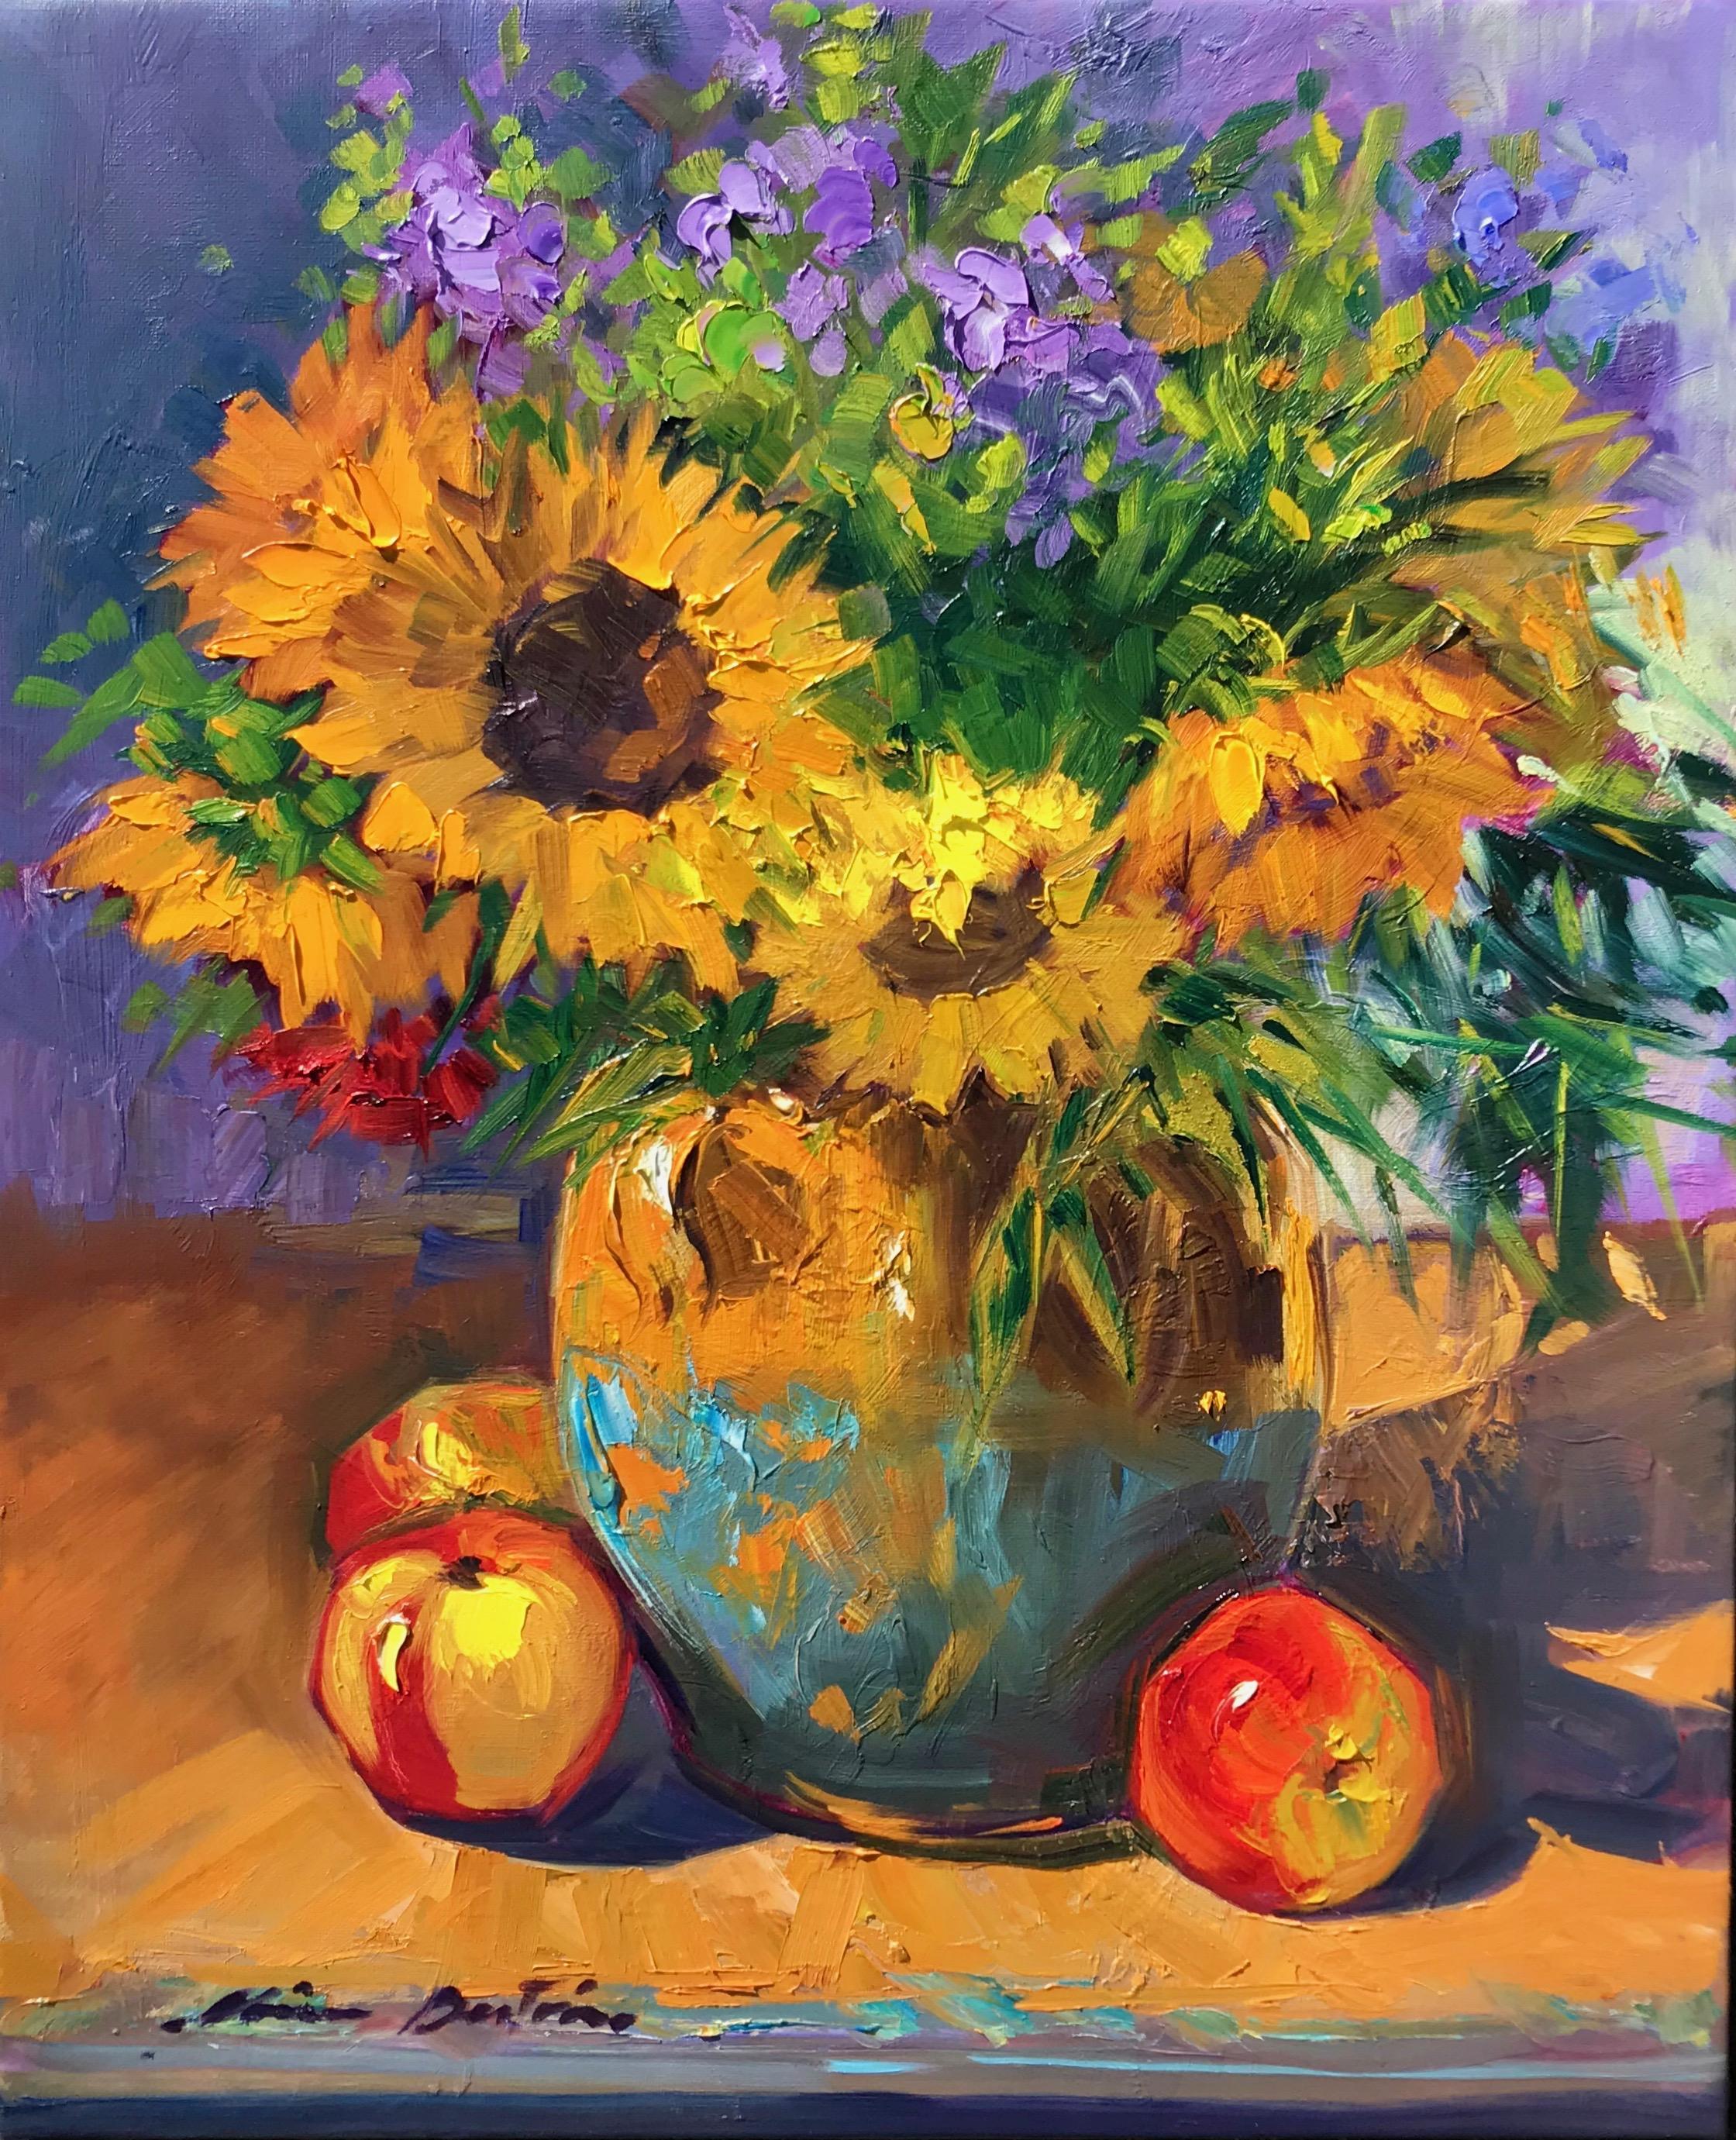 Maria Bertrán Still-Life Painting - "Blue and Gold Vase With Sunflowers" Contemporary Impressionist Still Life Oil